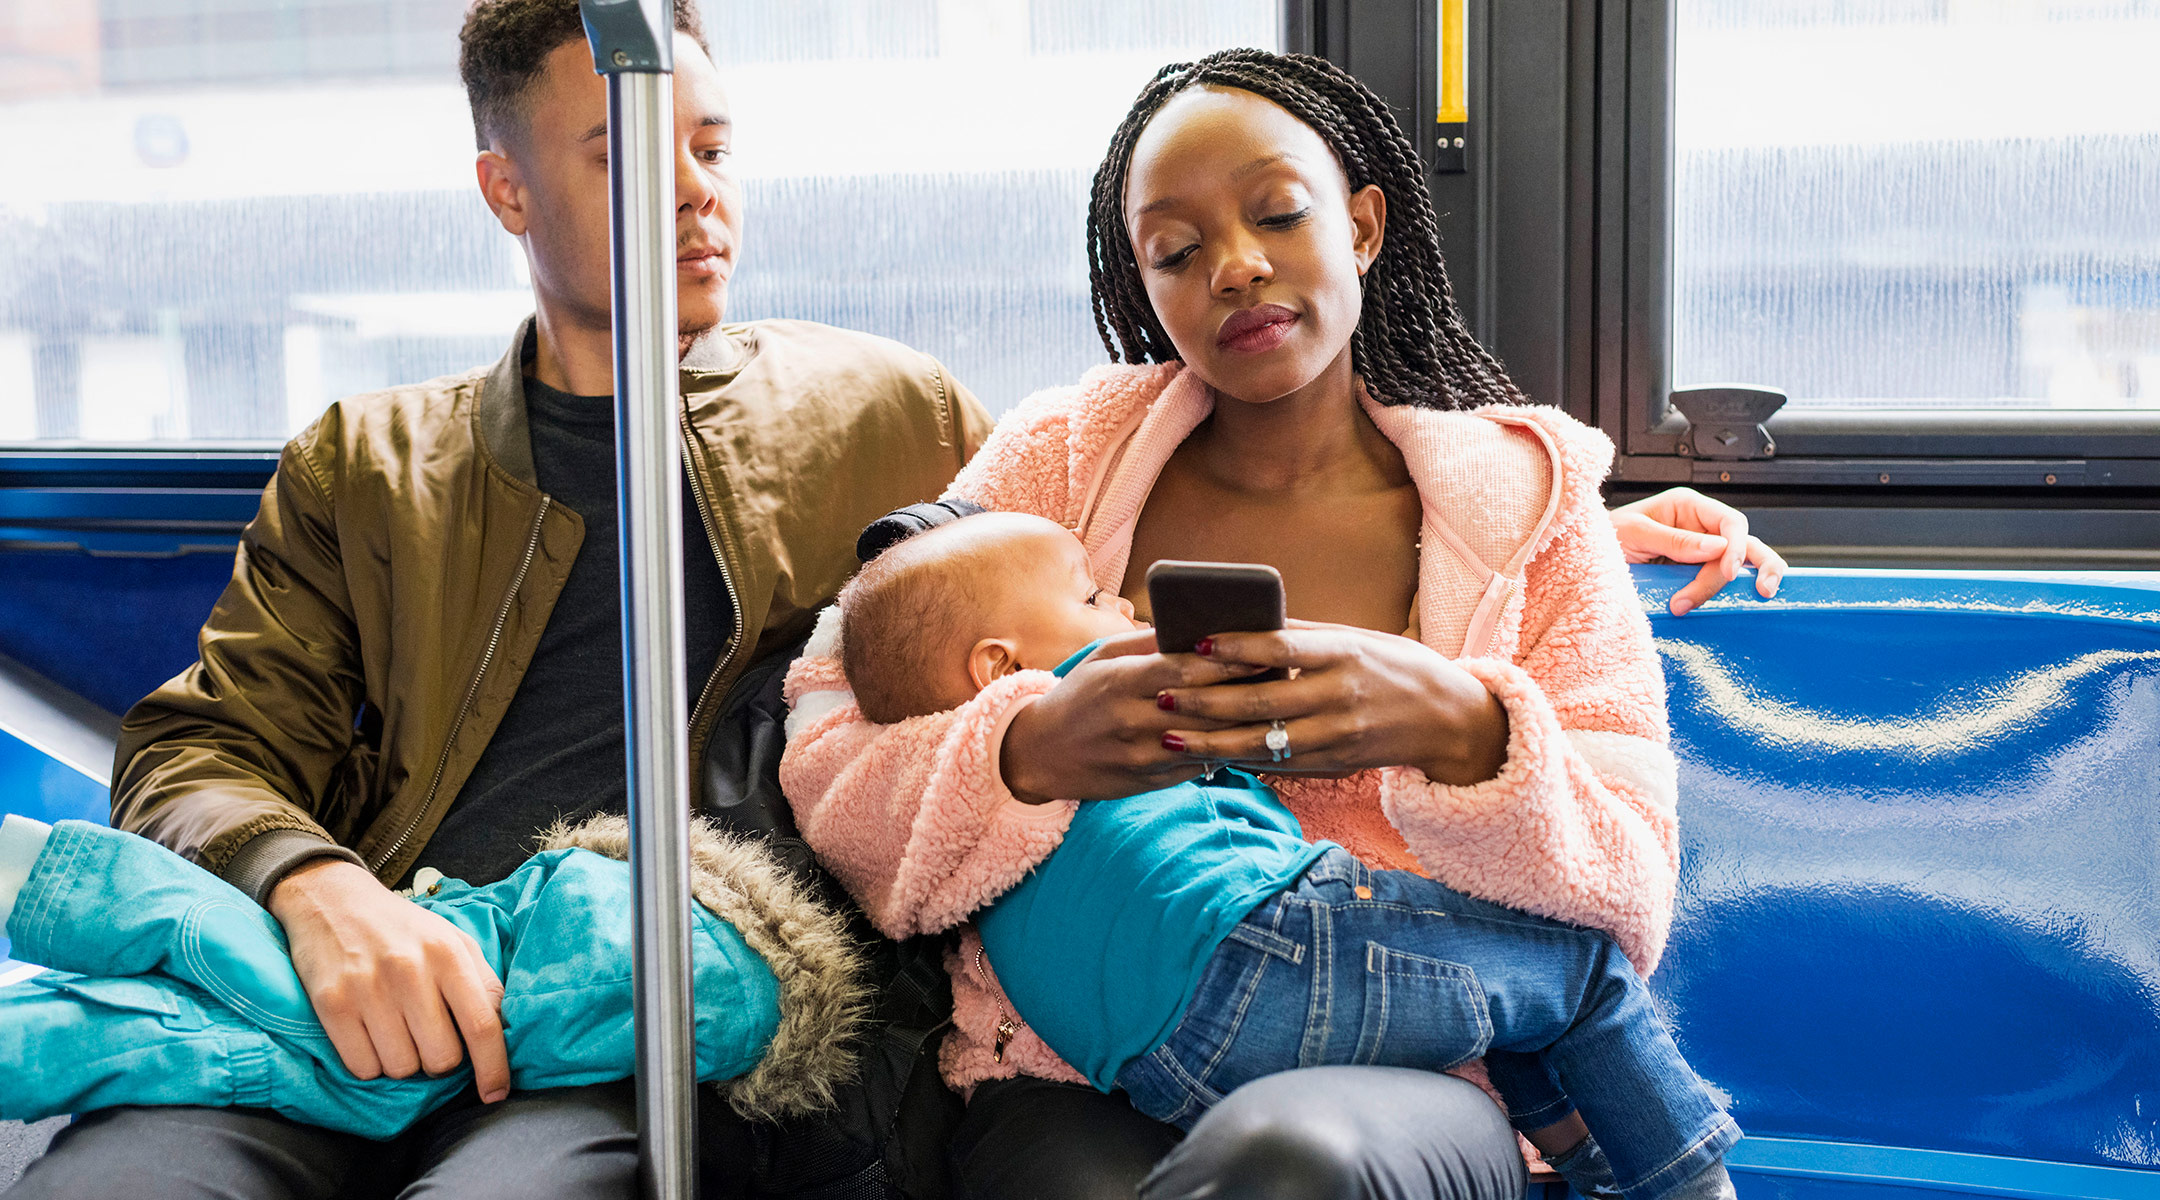 mom breastfeeding her baby in public on the bus next to her partner